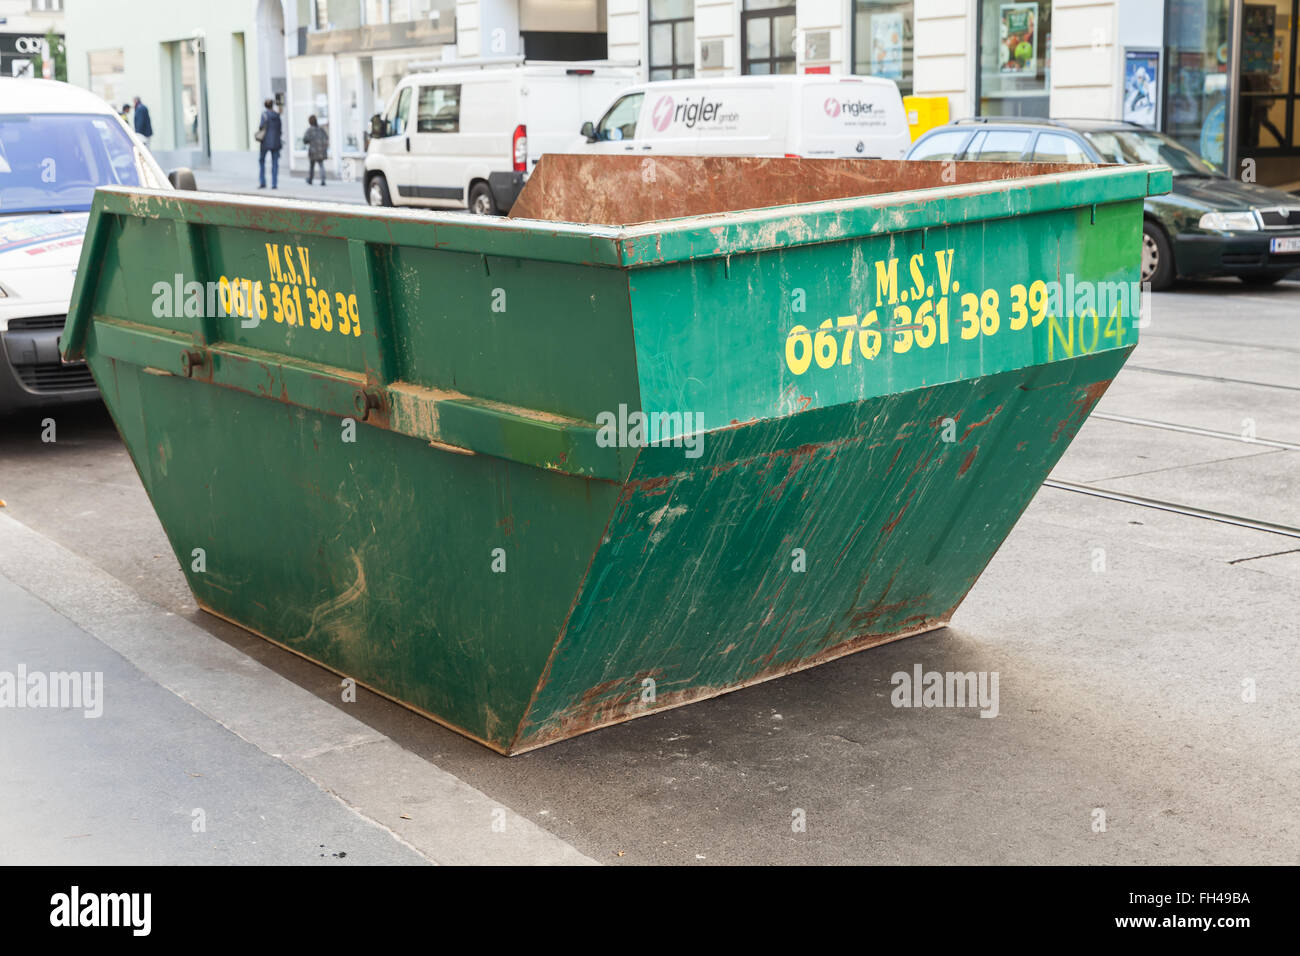 Vienna, Austria - November 2, 2015: Big green trash container stands on a roadside in the city Stock Photo